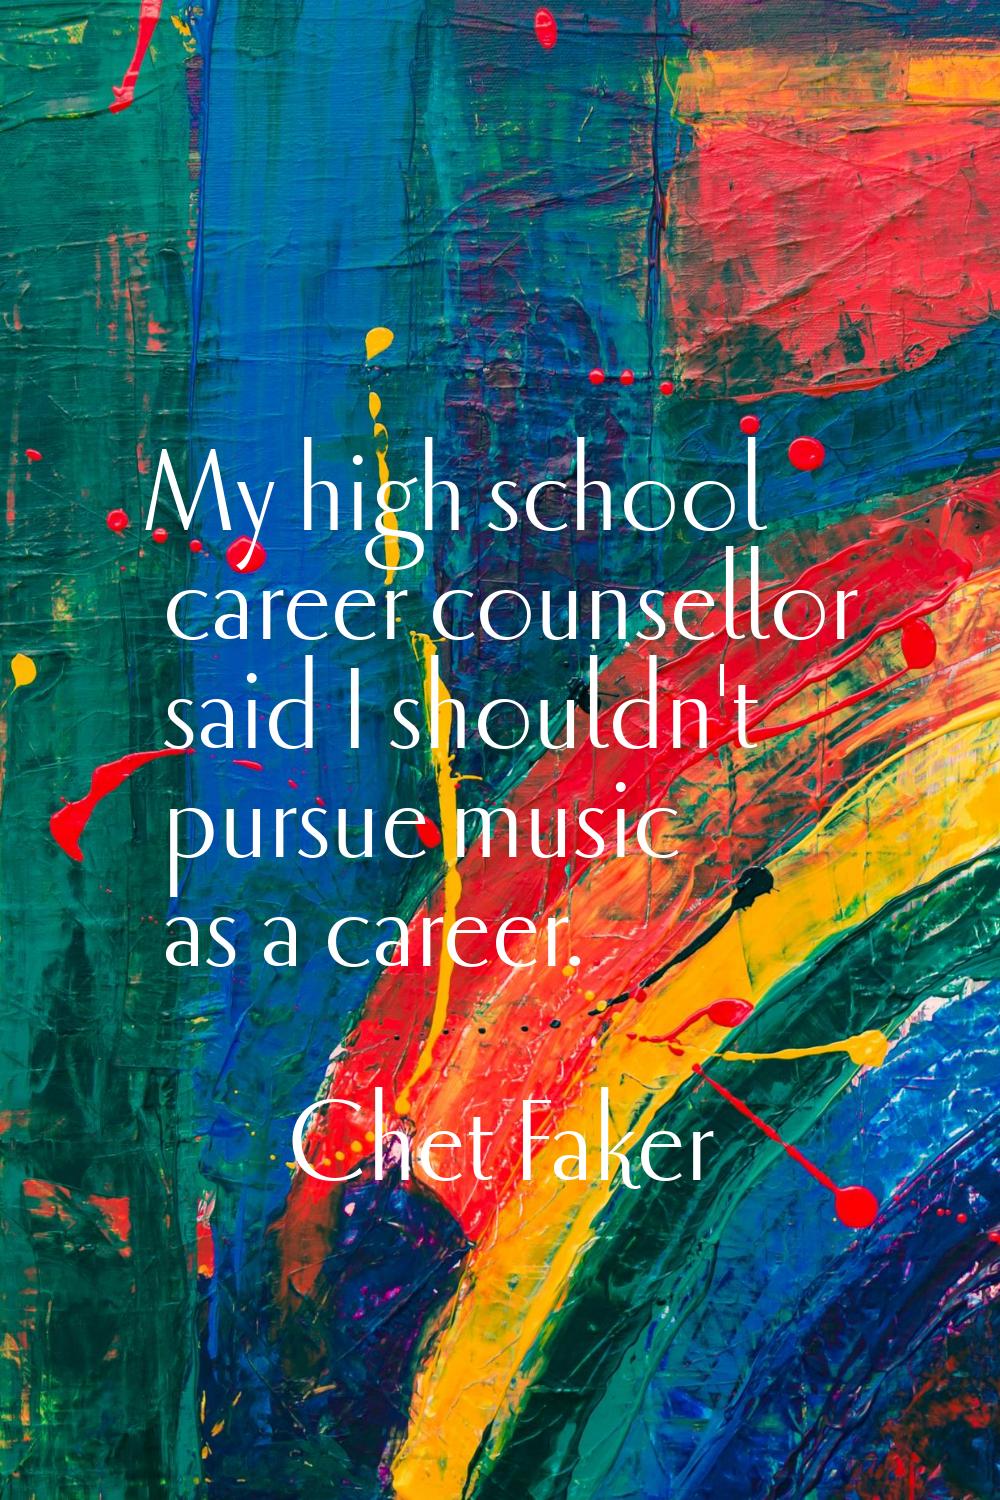 My high school career counsellor said I shouldn't pursue music as a career.